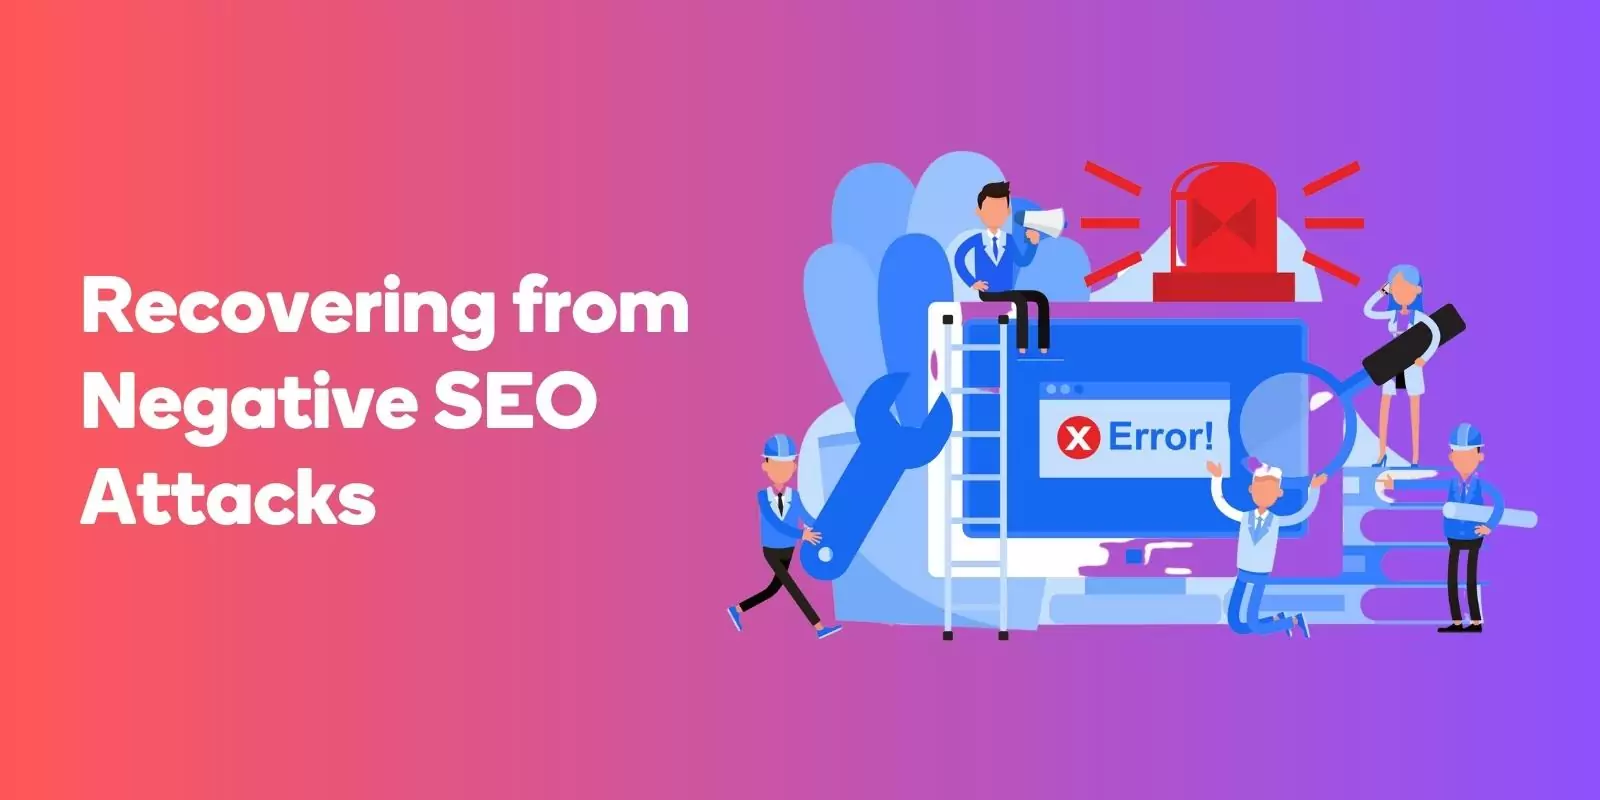 Recovering from Negative SEO Attacks